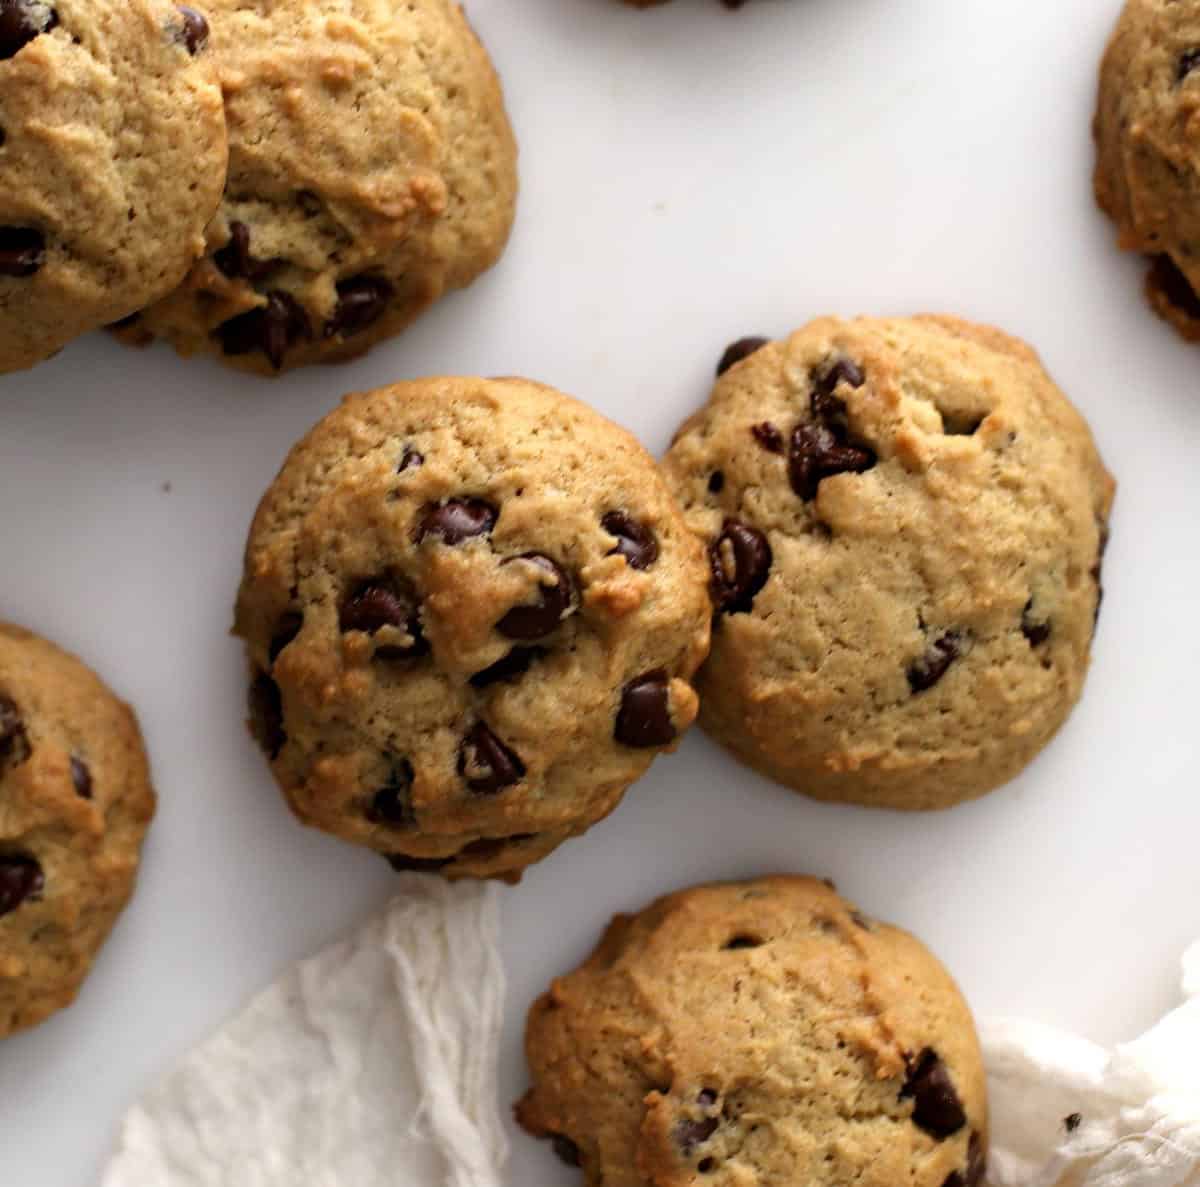  The best things in life are sweet, and these cookies are no exception.